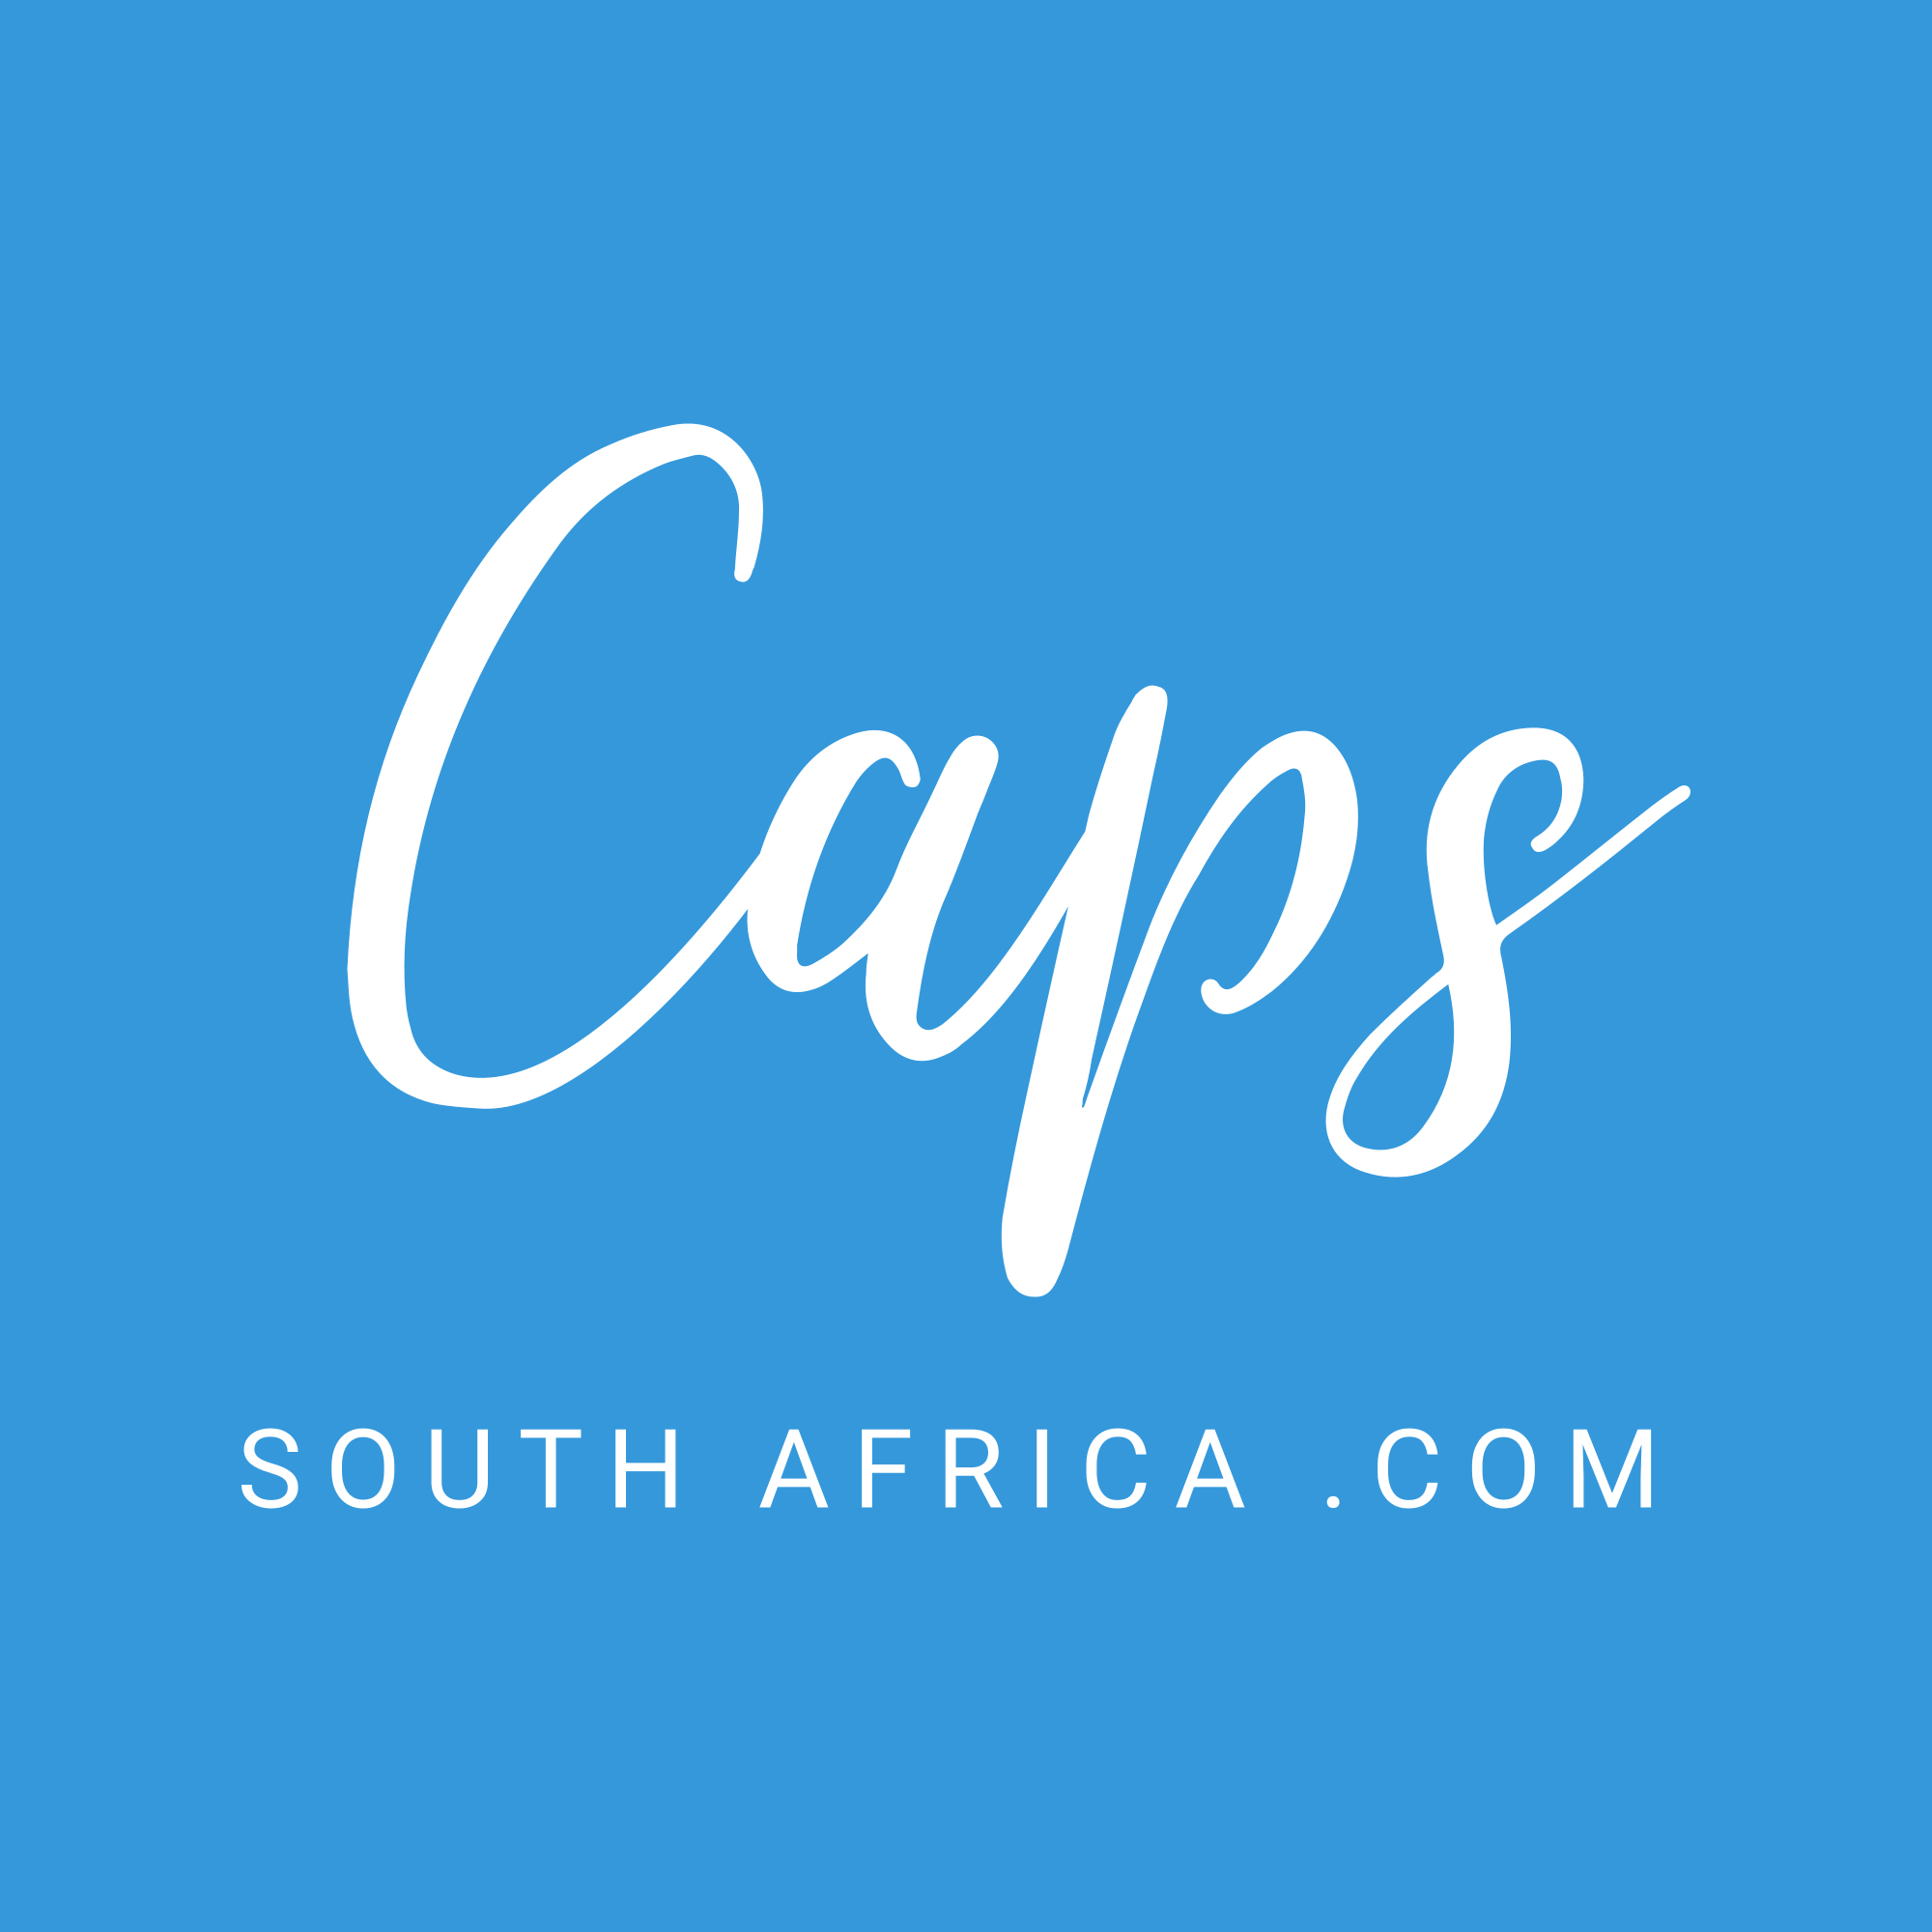 Caps South Africa